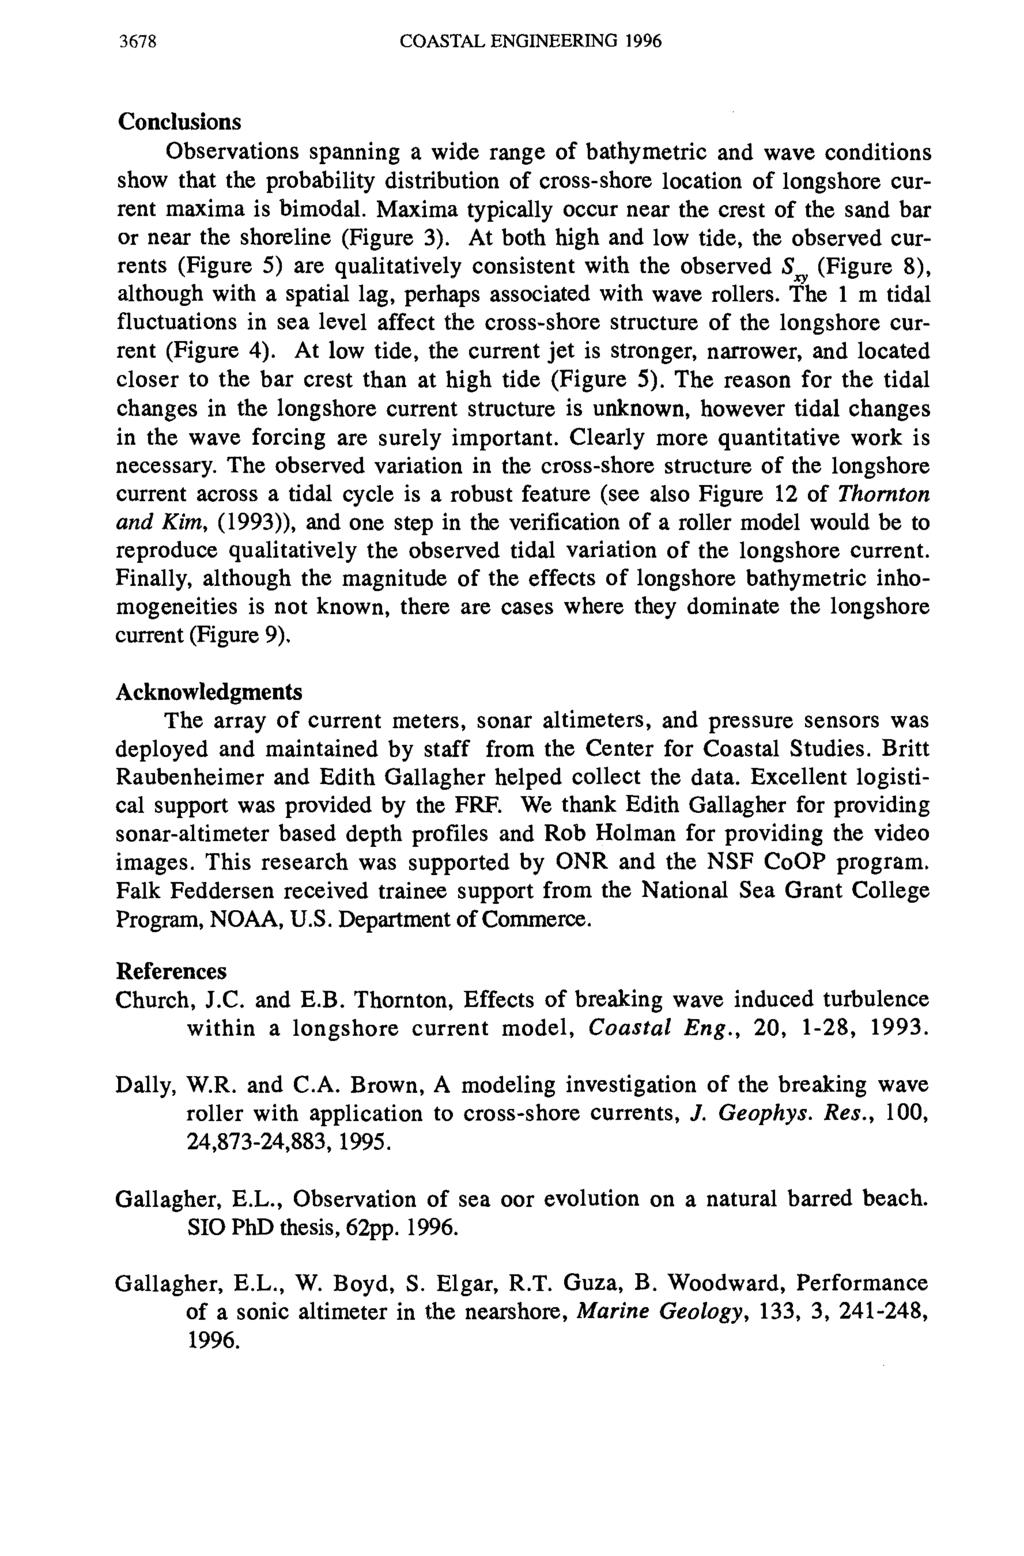 3678 COASTAL ENGINEERING 1996 Conclusons Observatons spannng a wde range of bathymetrc and wave condtons show that the probablty dstrbuton of cross-shore locaton of longshore current maxma s bmodal.